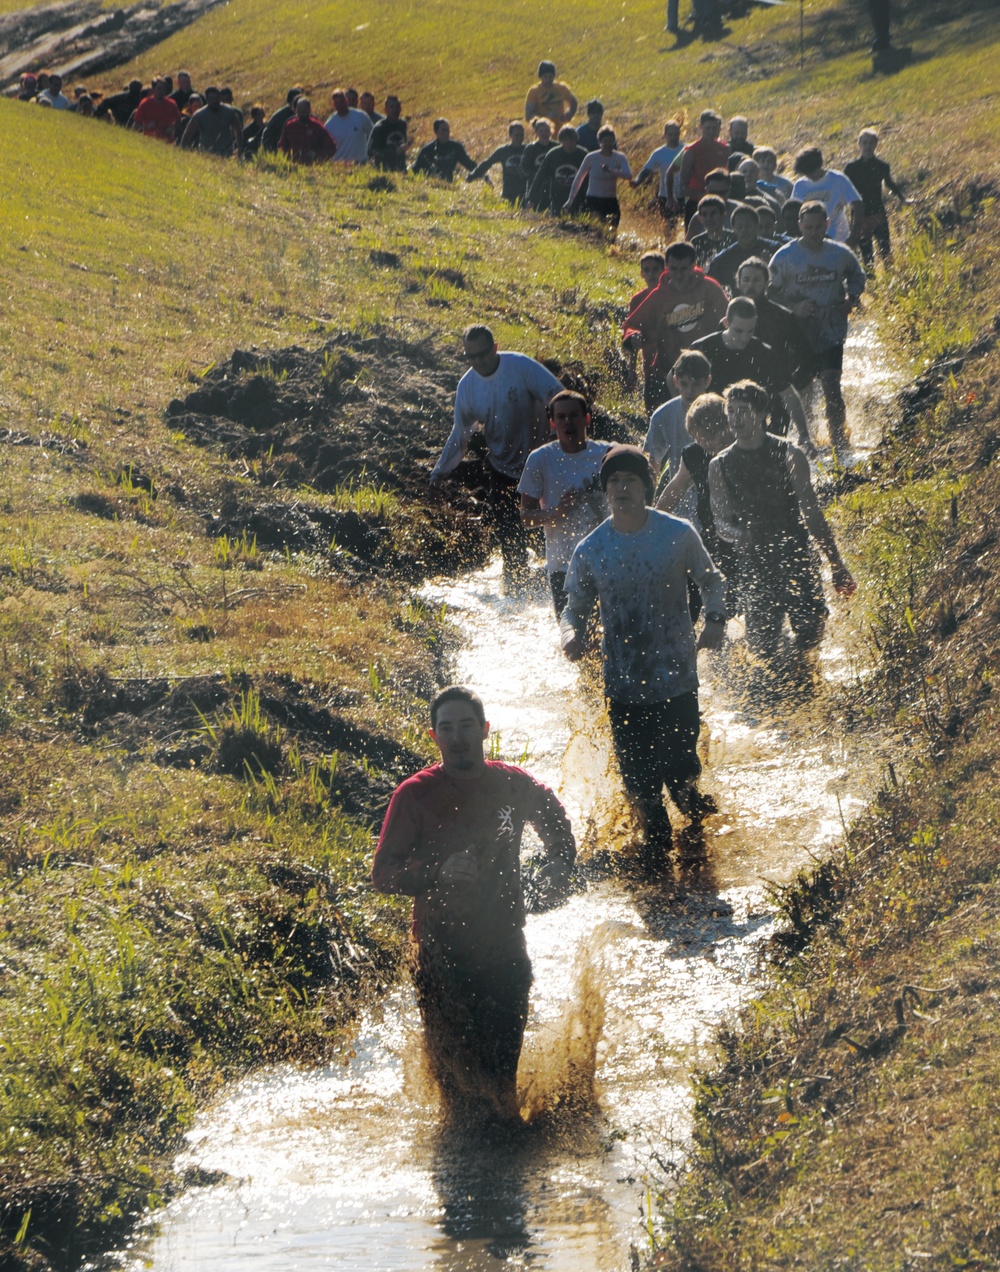 MCLB Albany’s first-ever Mud Run from a Marine participant’s perspective